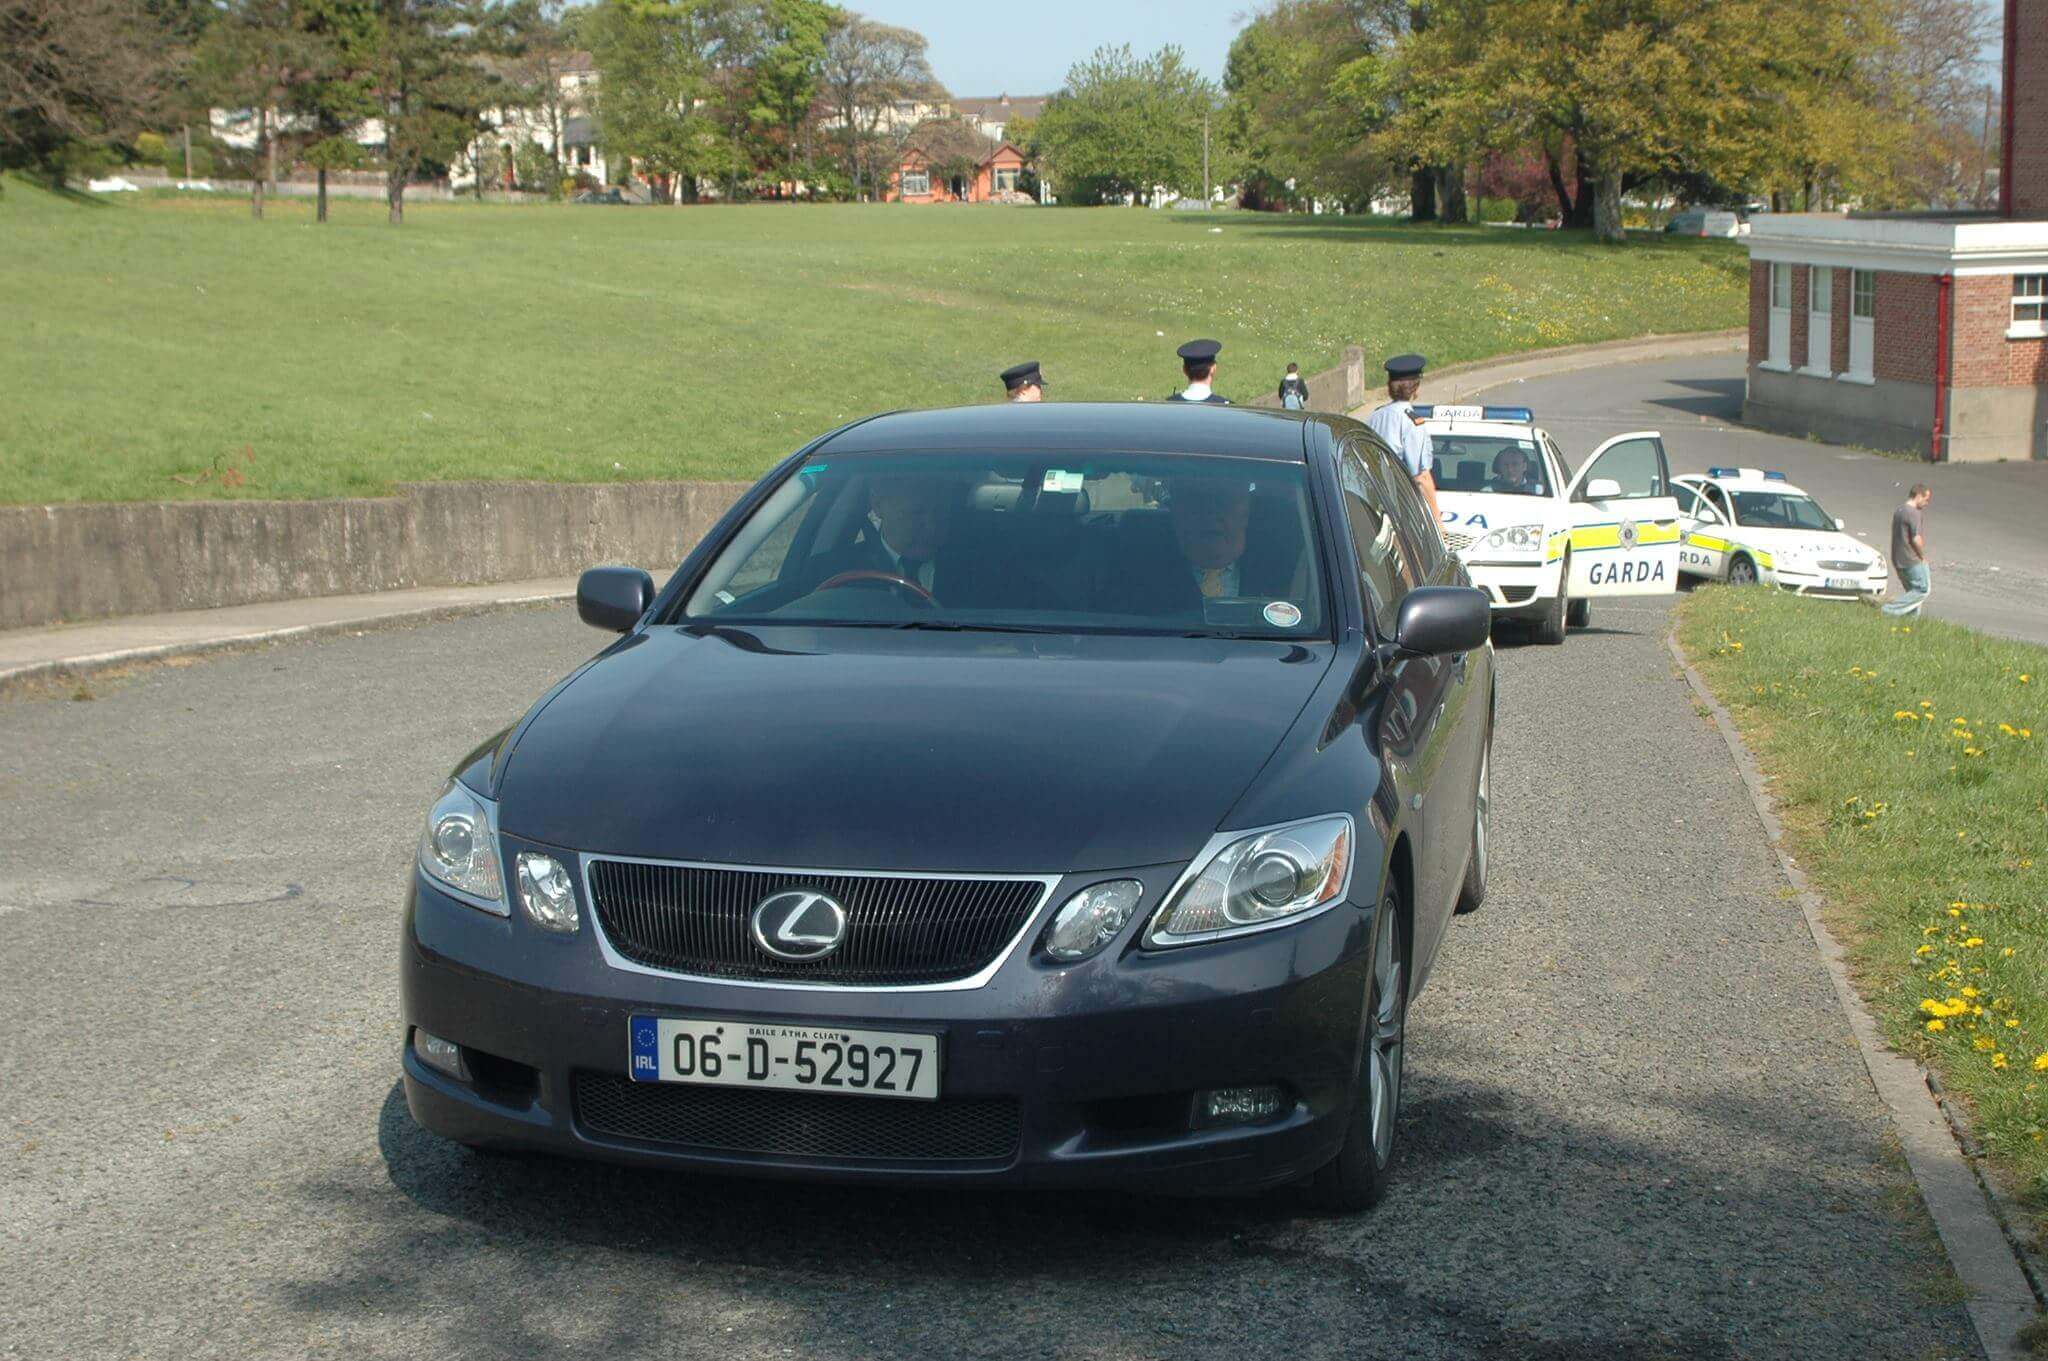 Bertie Ahern, Dick Roche and lots of Gardai arrive at school. This was 2006